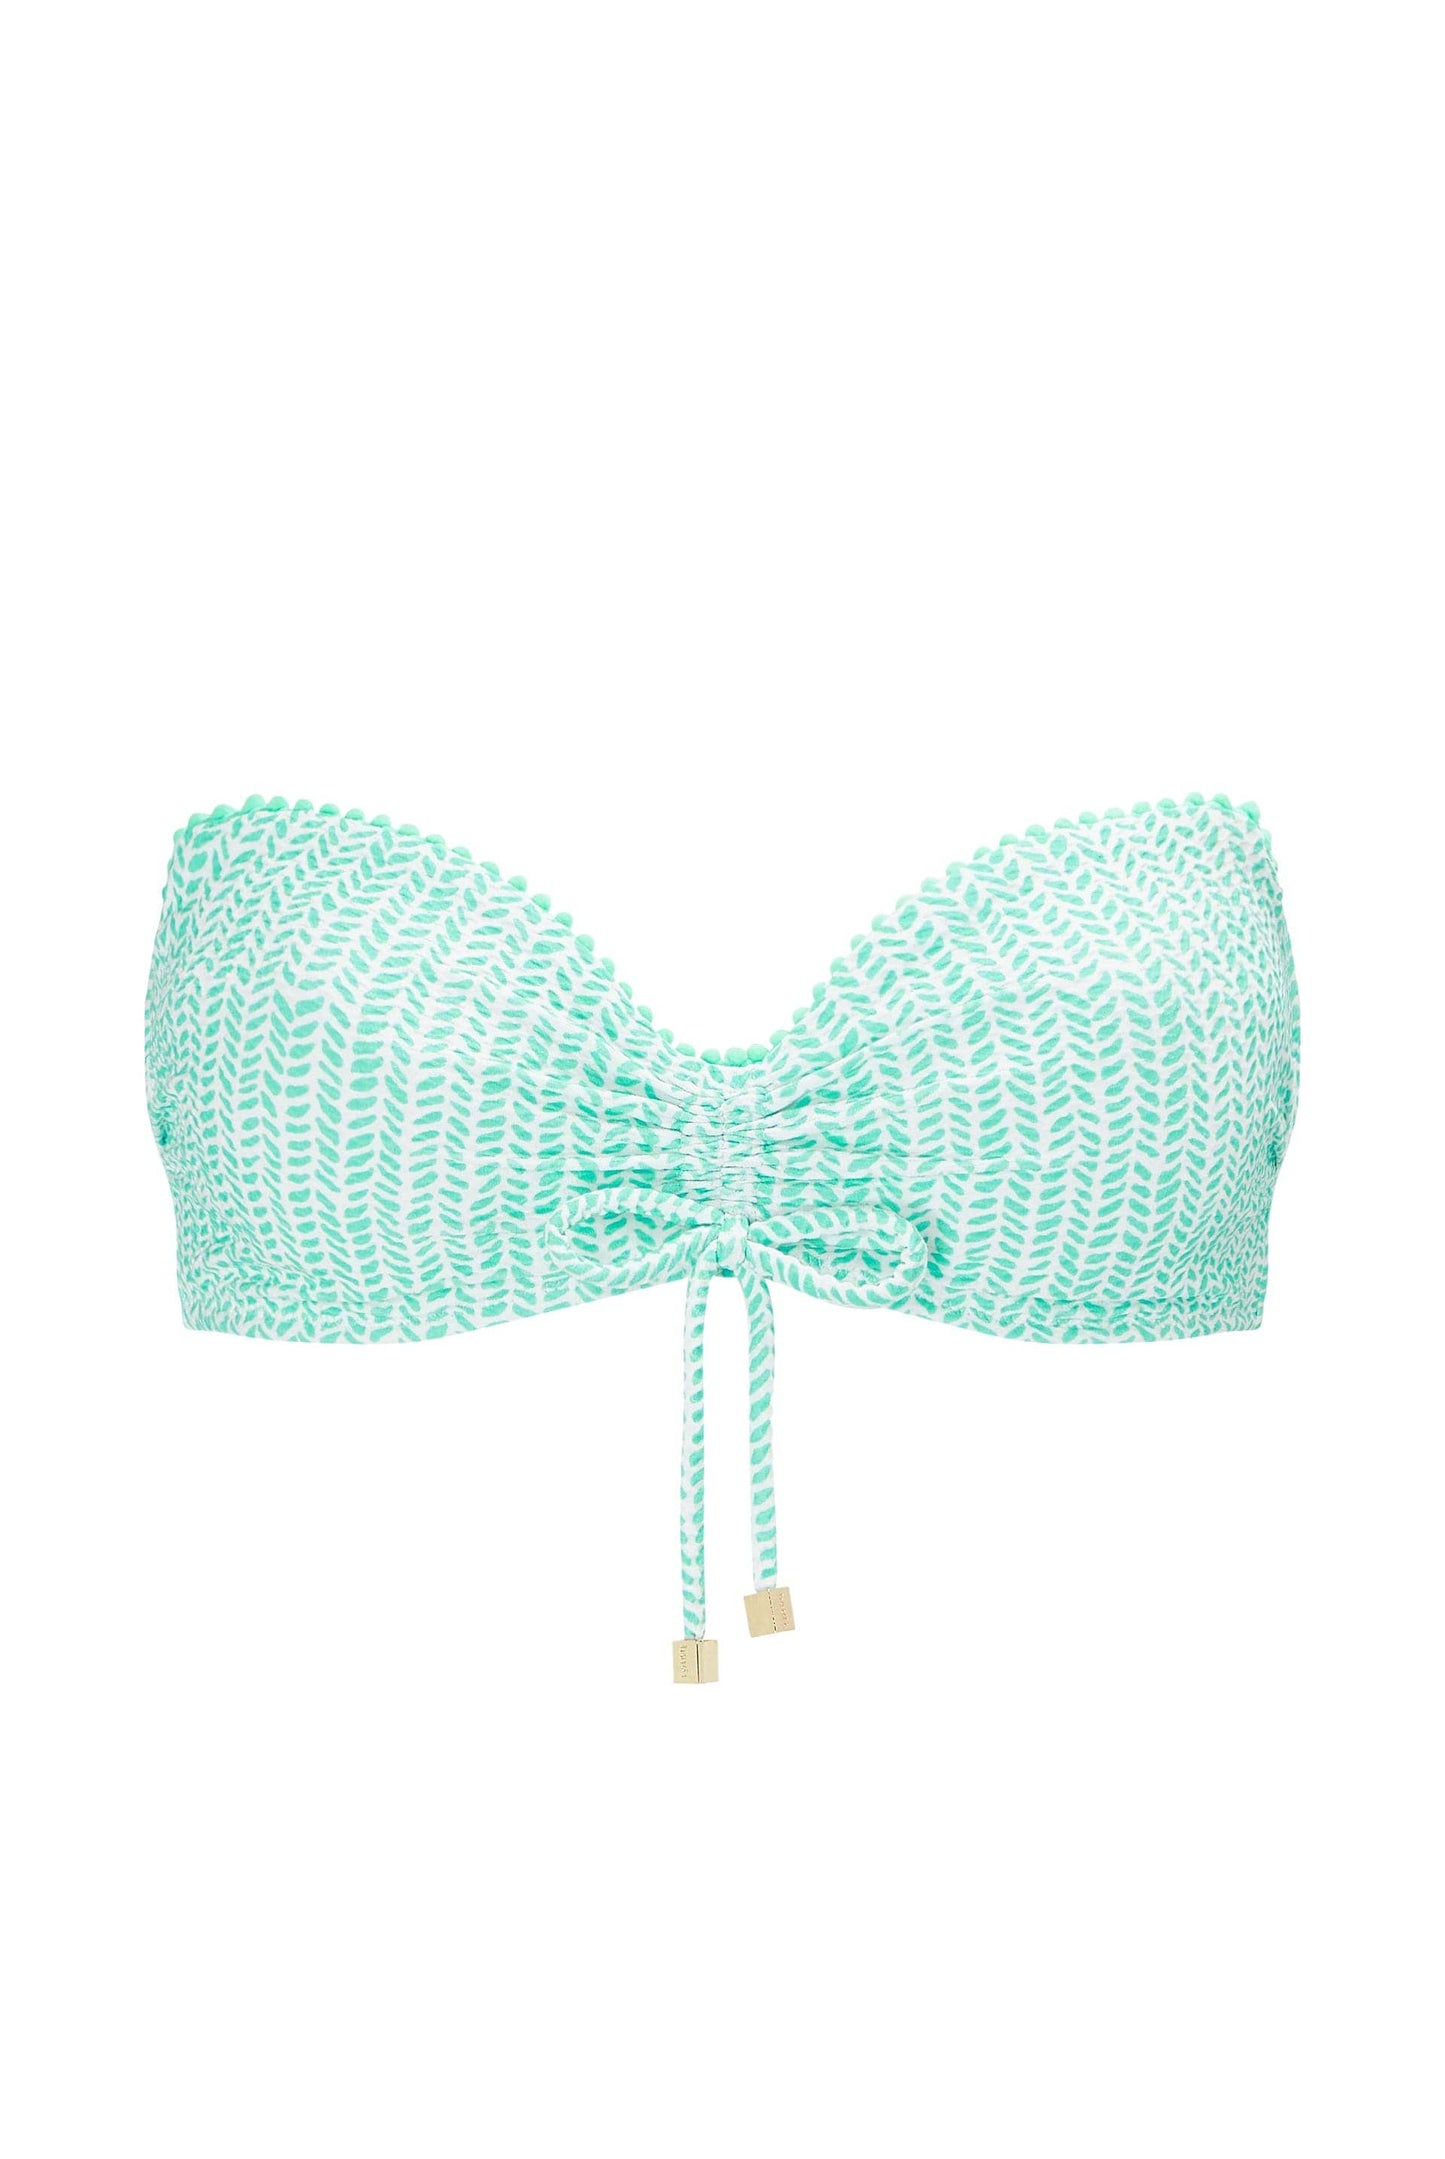 Seven Mile Beach Ruched Bandeau Top